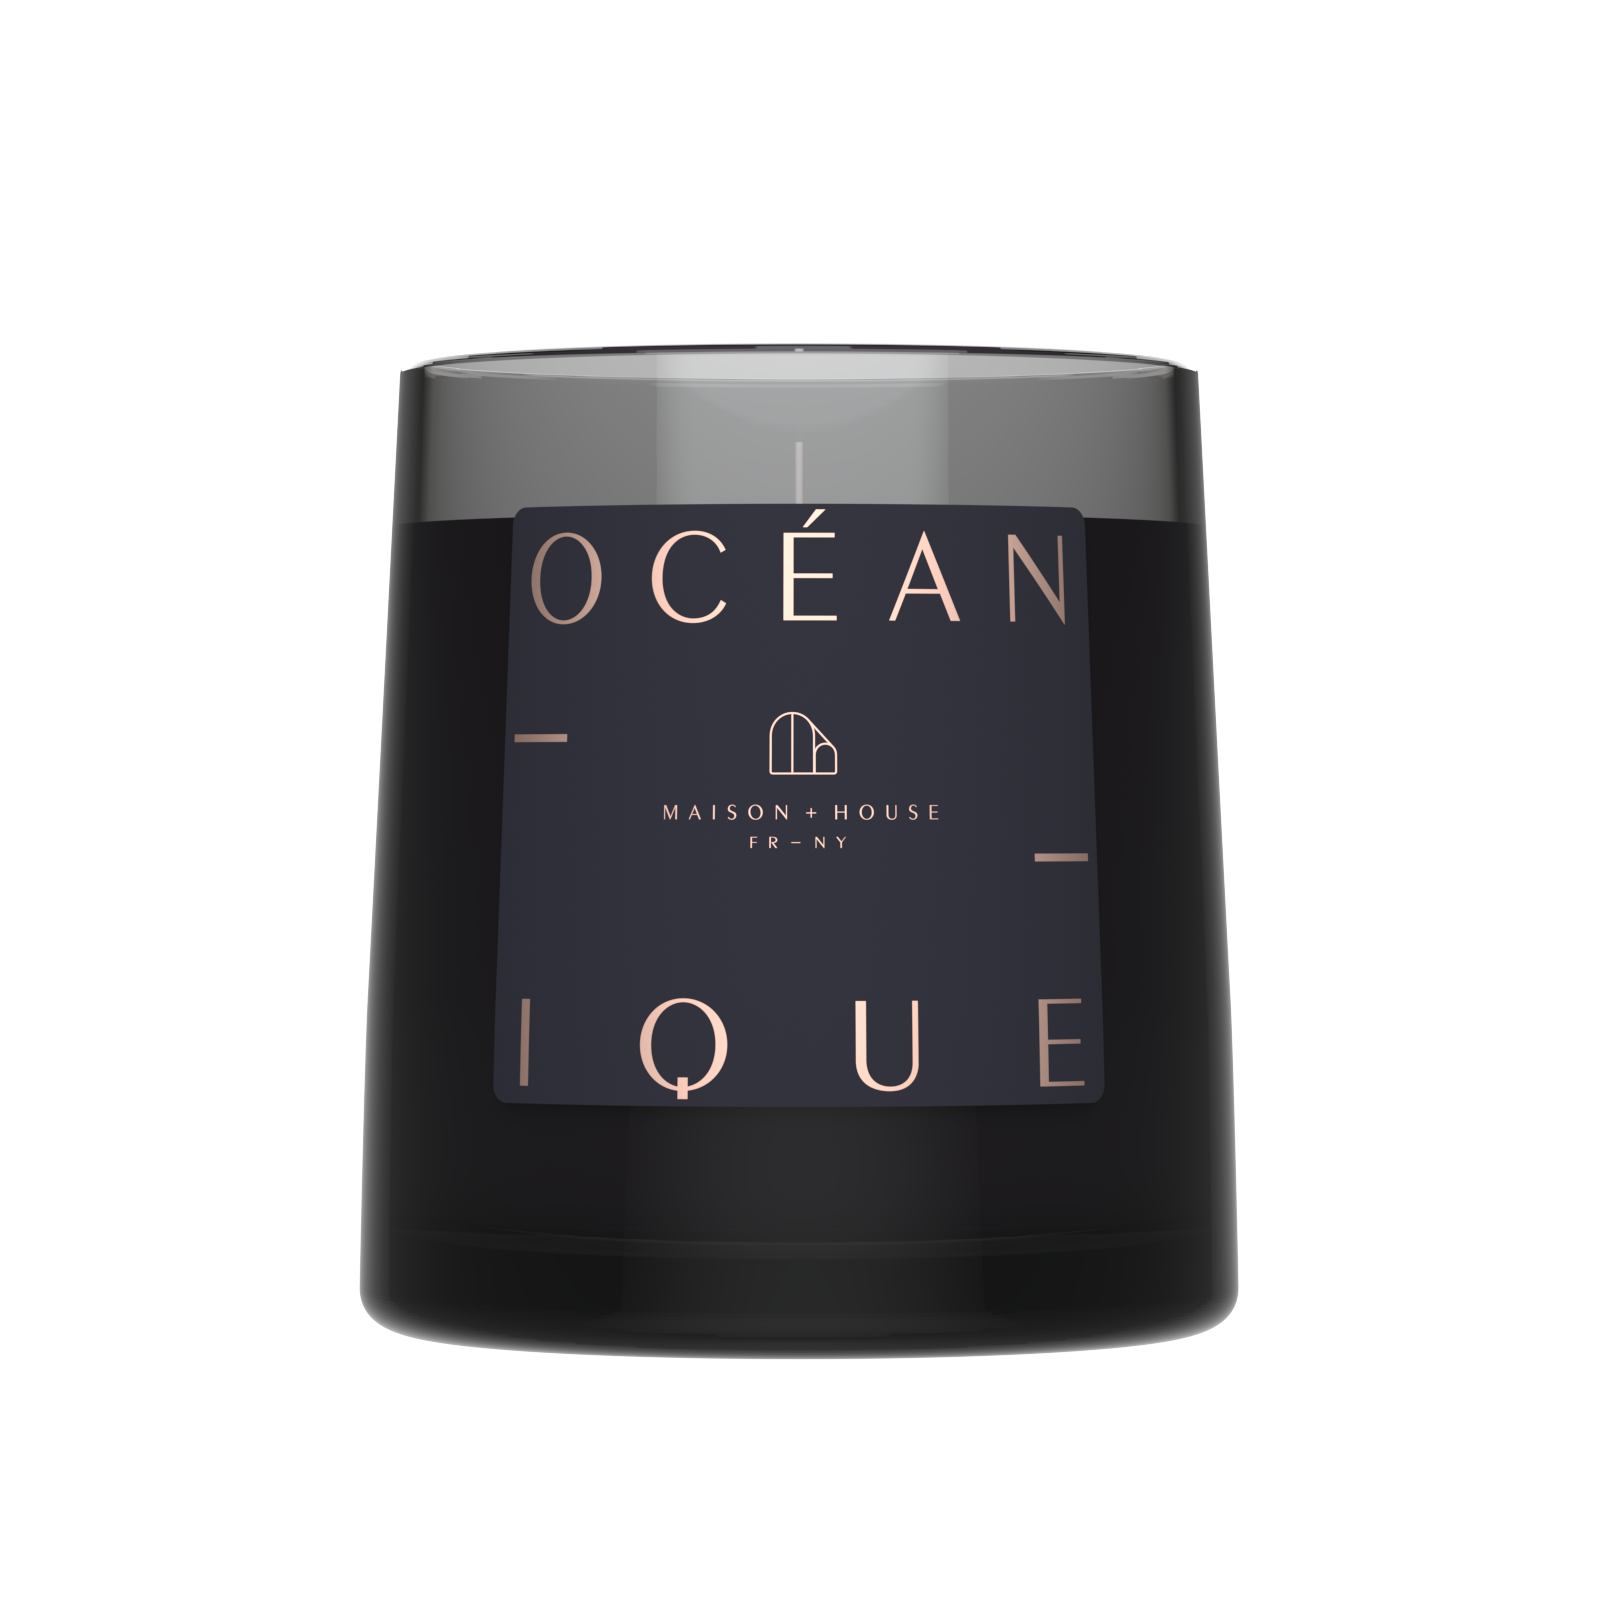 Sea Mist / Oceanique Artisanal French-Fragrance Candle